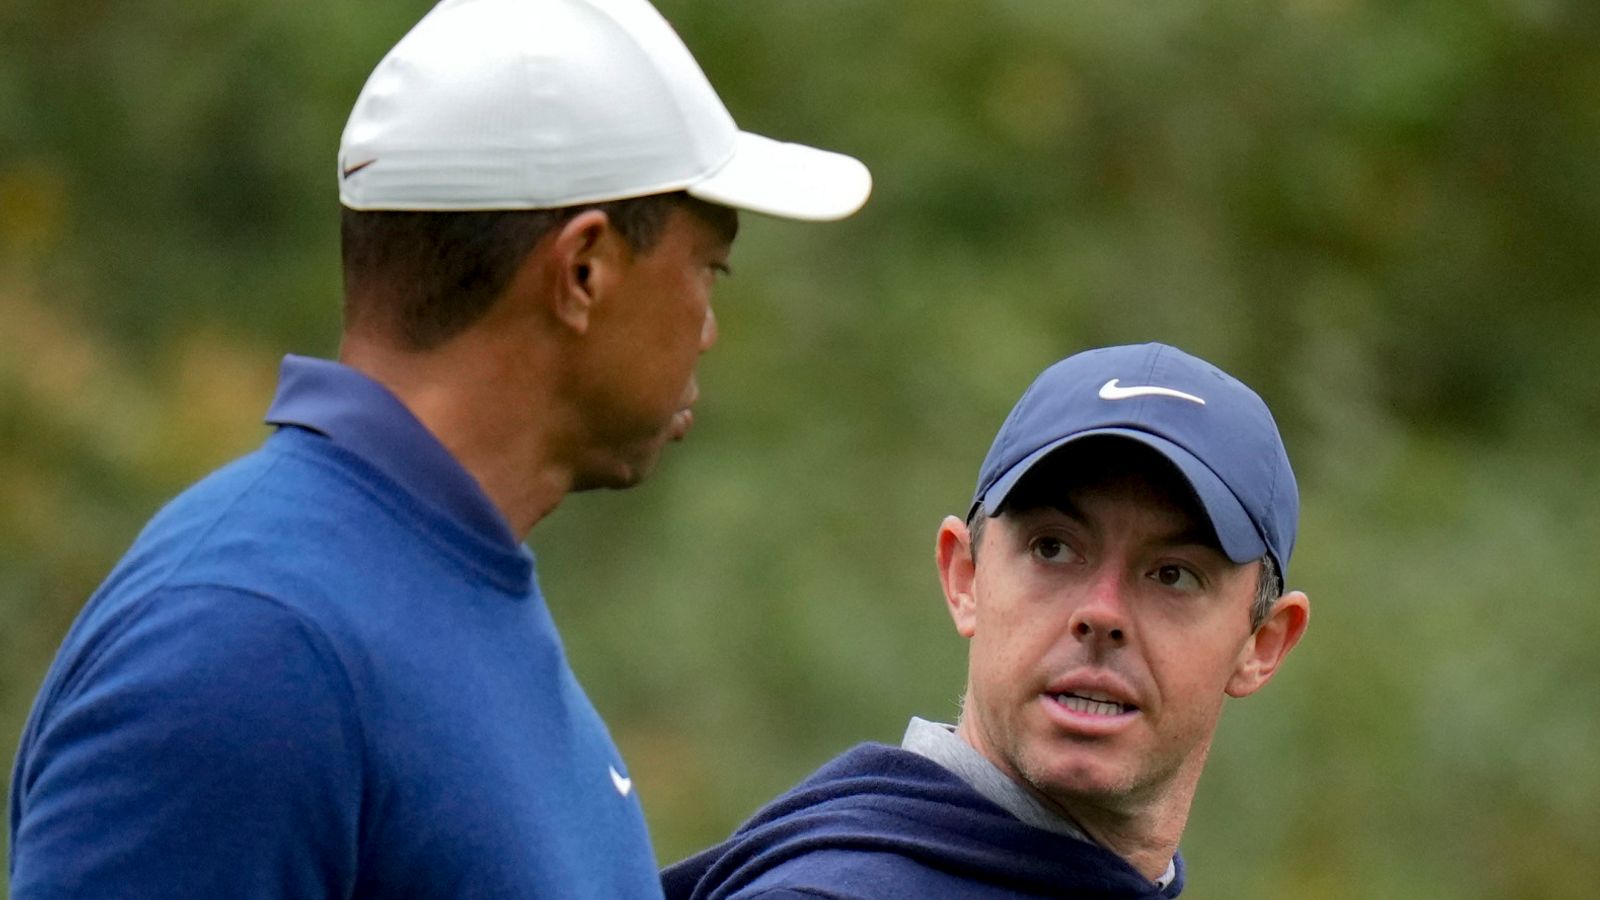 Tiger Woods and Rory McIlroy’s TGL: Indoor golf league launch postponed after stadium damage